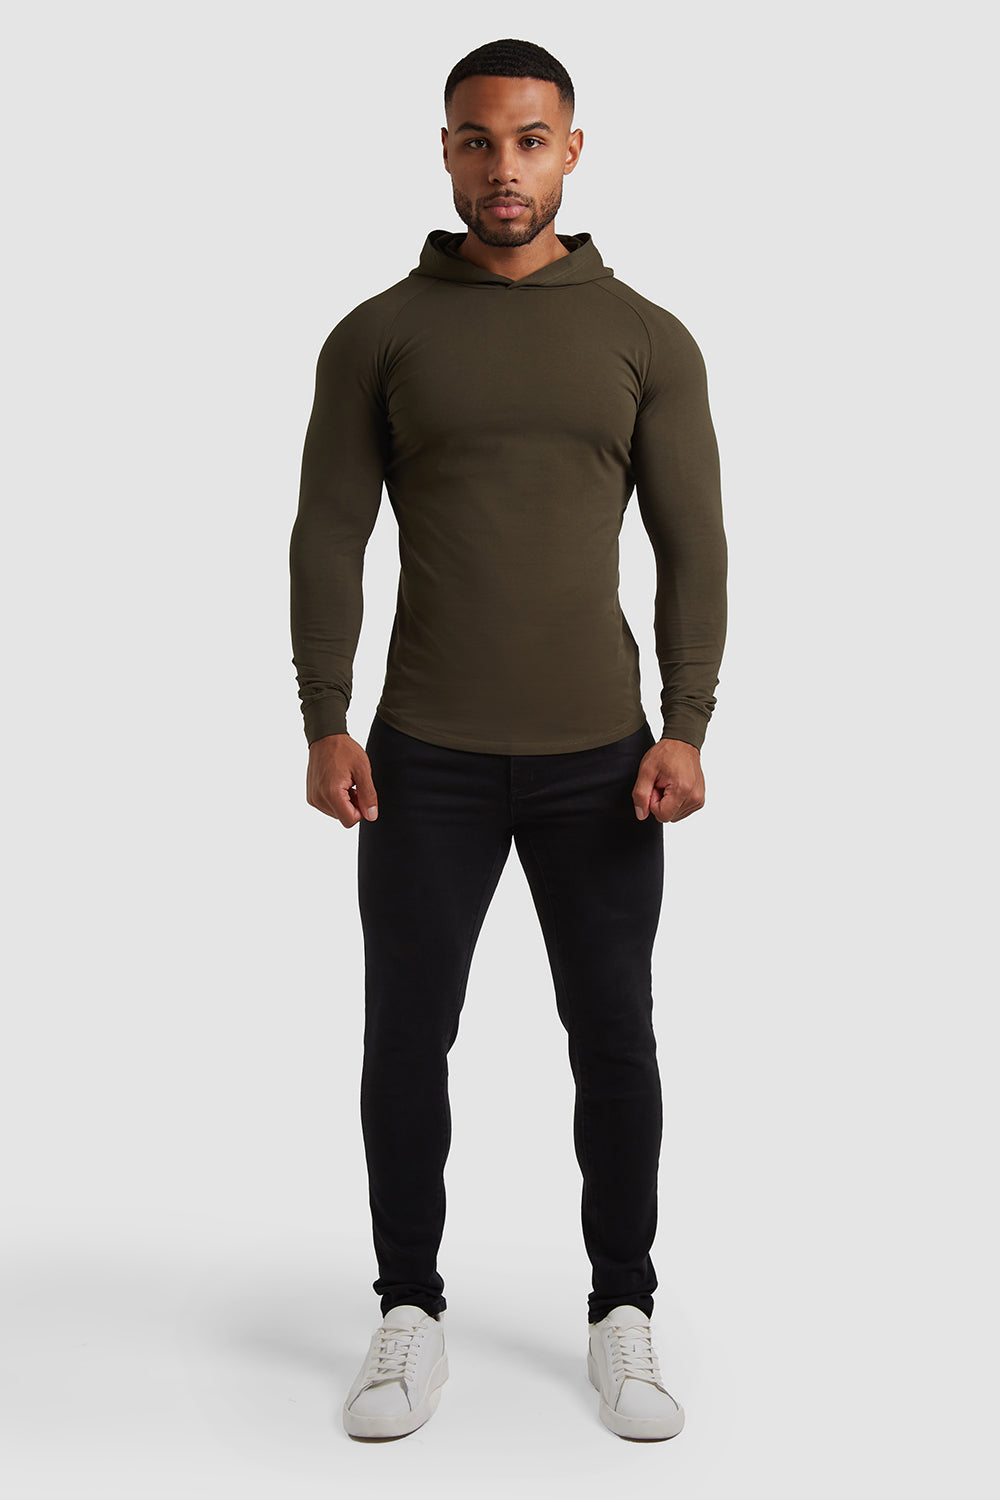 Hooded Top (LS) in Dark Olive - TAILORED ATHLETE - ROW